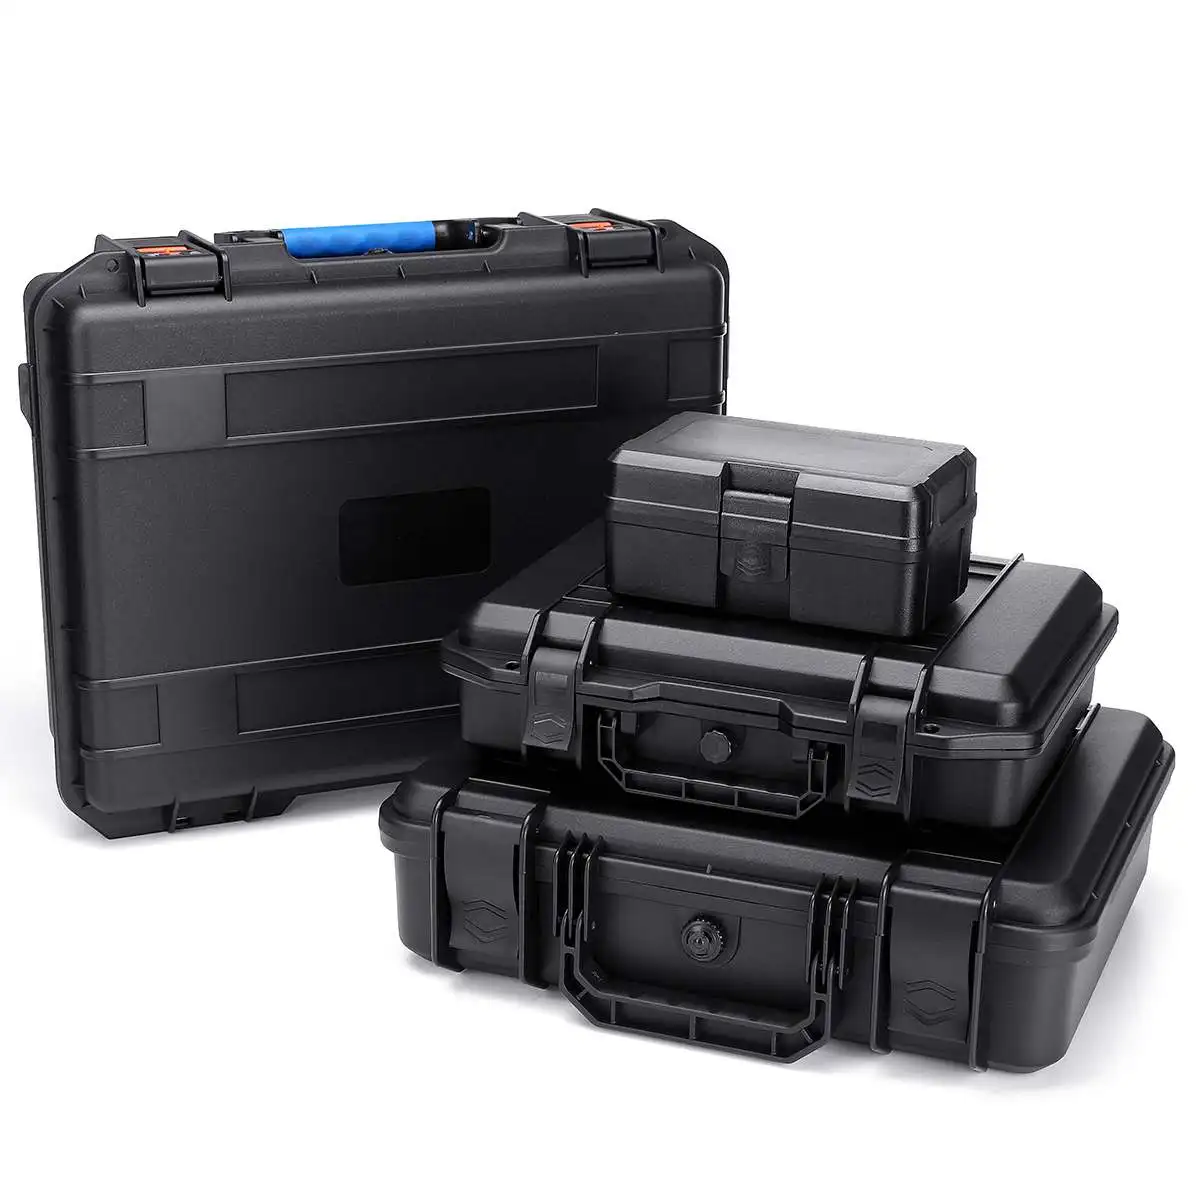 Waterproof Portable Hard Carry Tool Kits Protective Case Shockproof Storage Box 